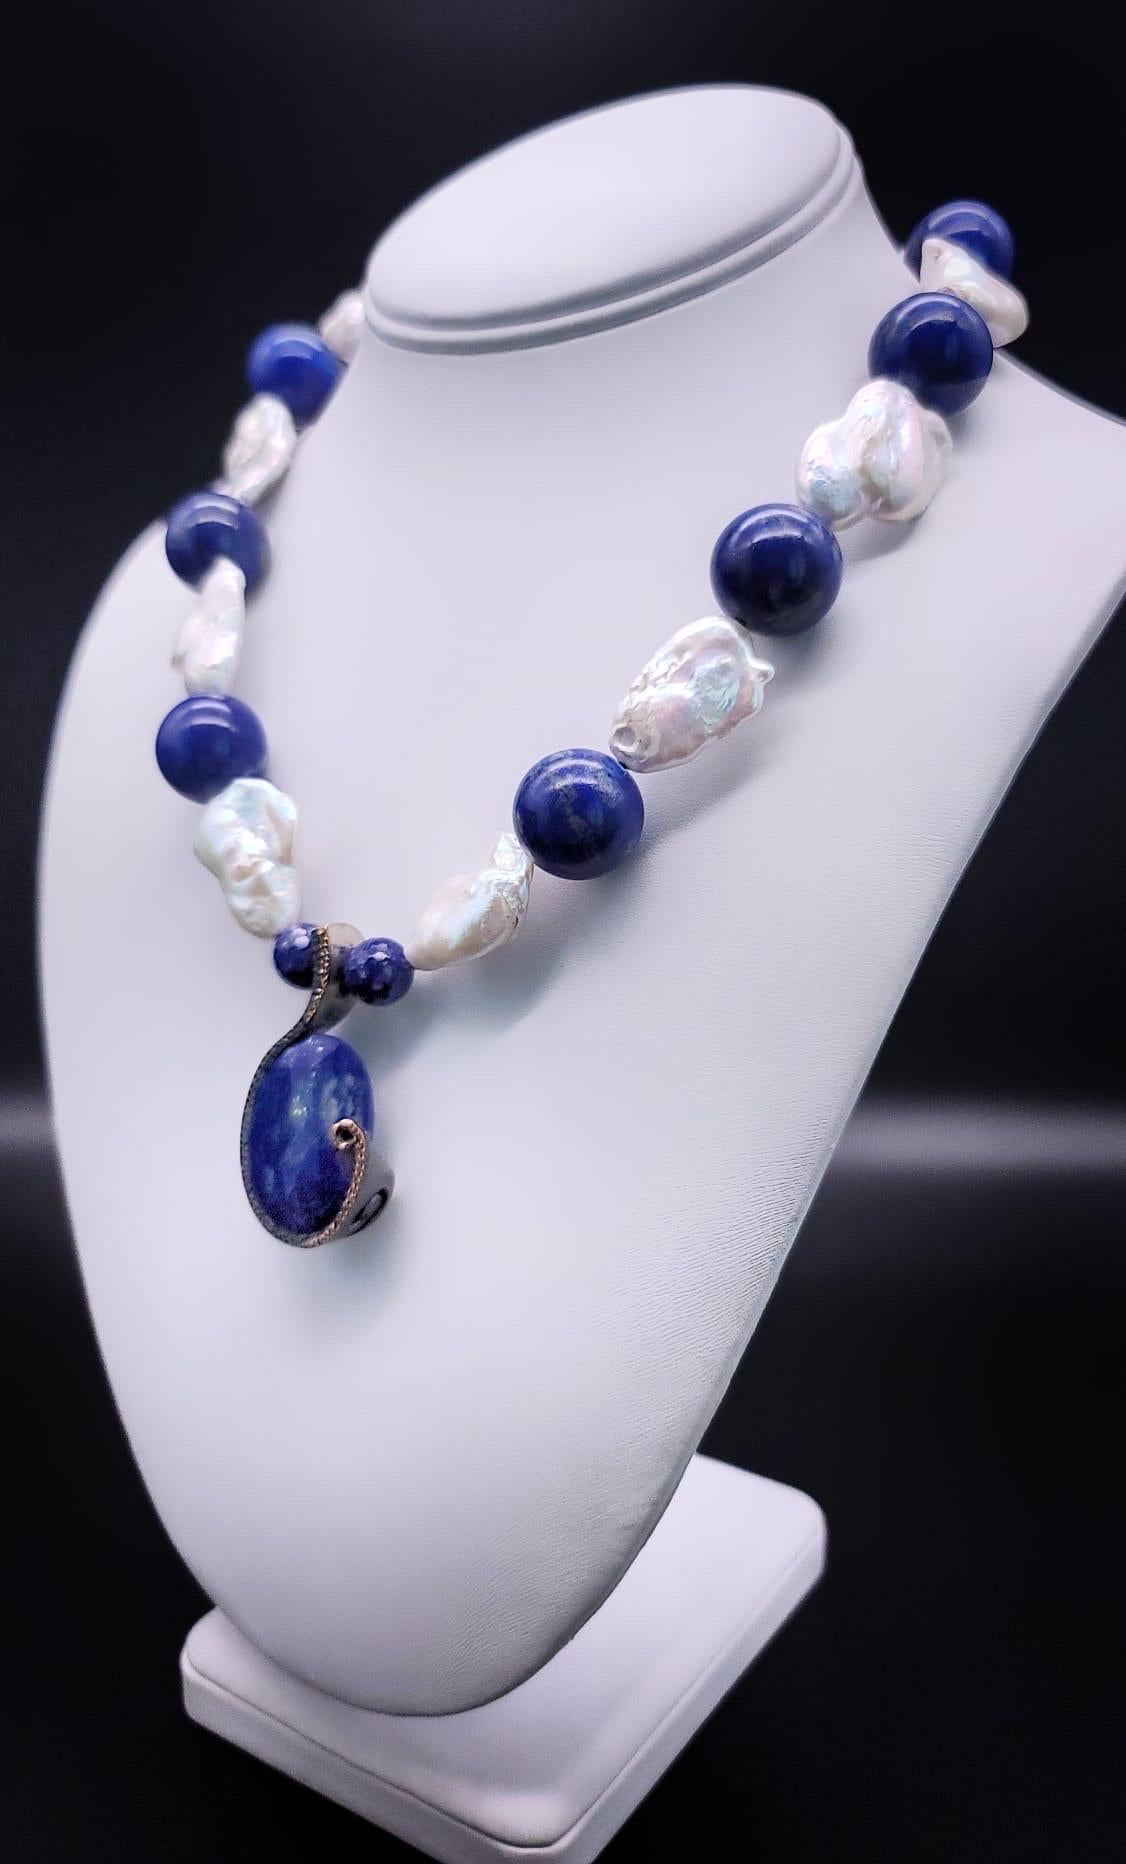 One-of-a-Kind

Starting with the beautiful curvy piece of jewelry that is sure to turn heads. This unique necklace features a beautiful curvy faceted Lapis pendant that has been expertly handcrafted in the Bora studio. The pendant serves as an